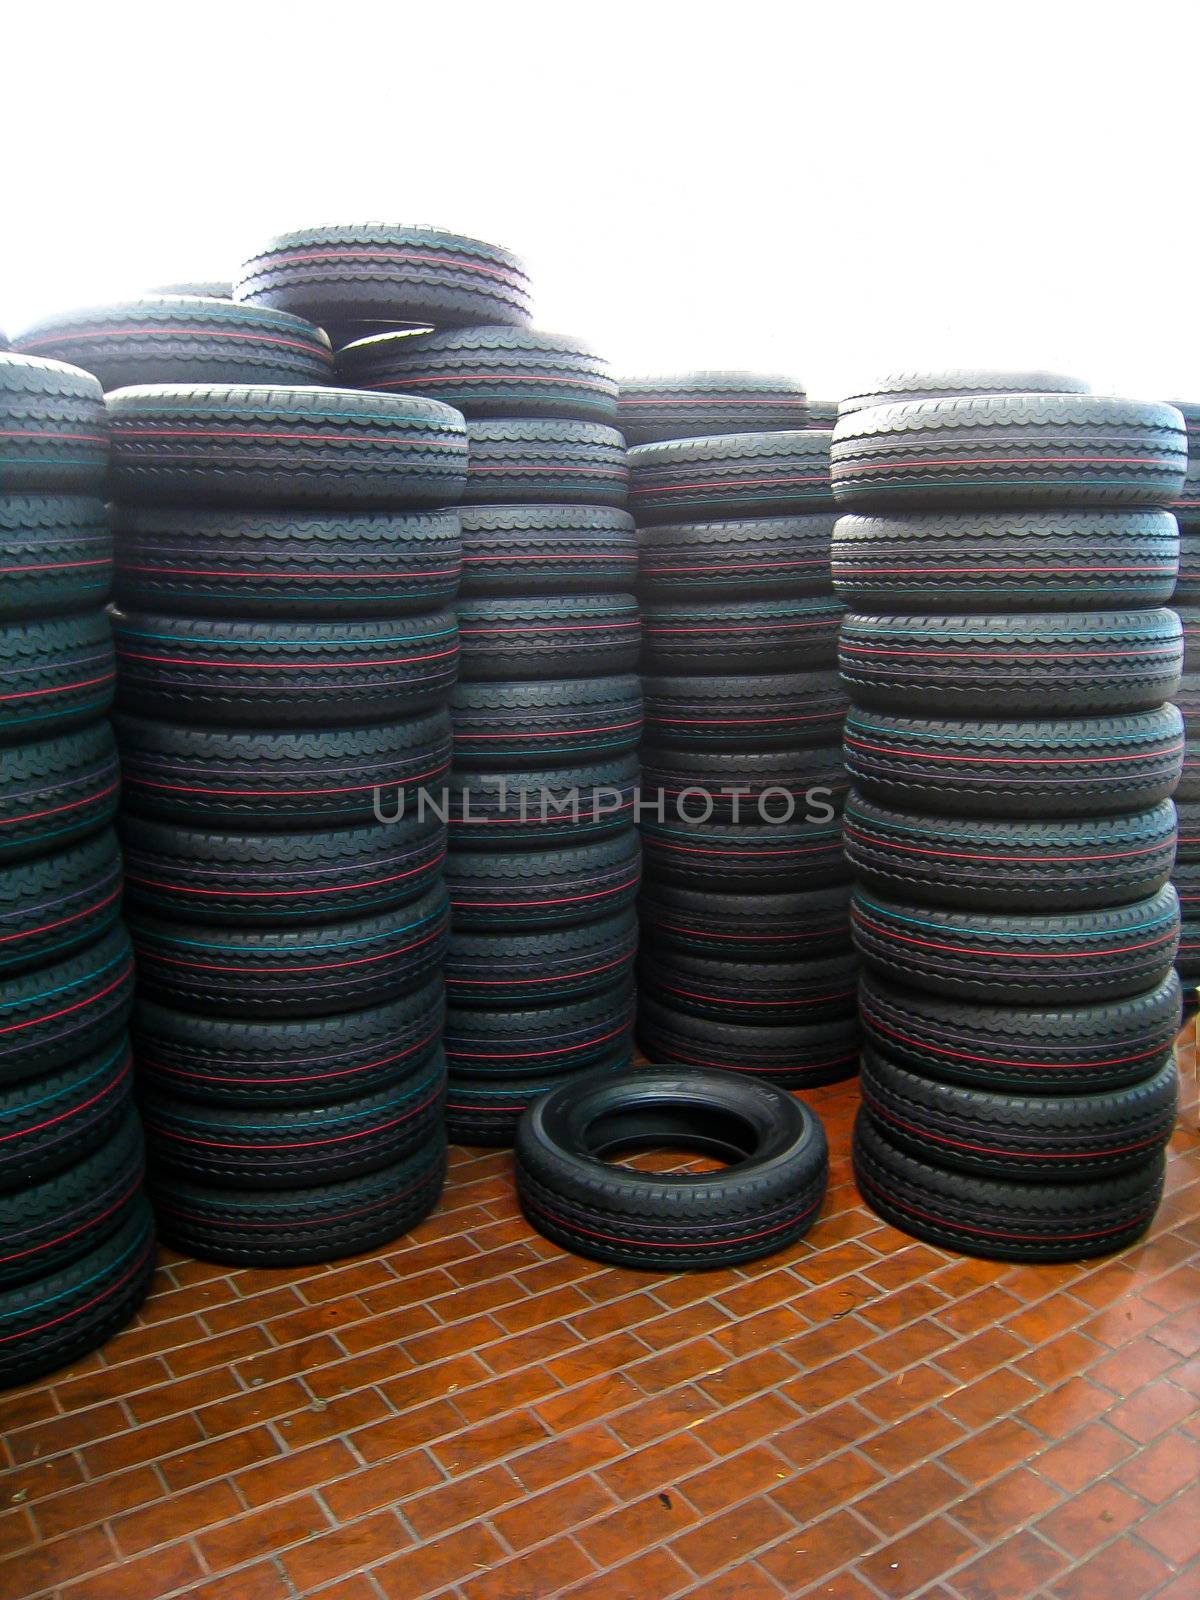 Lots of tire on the floor